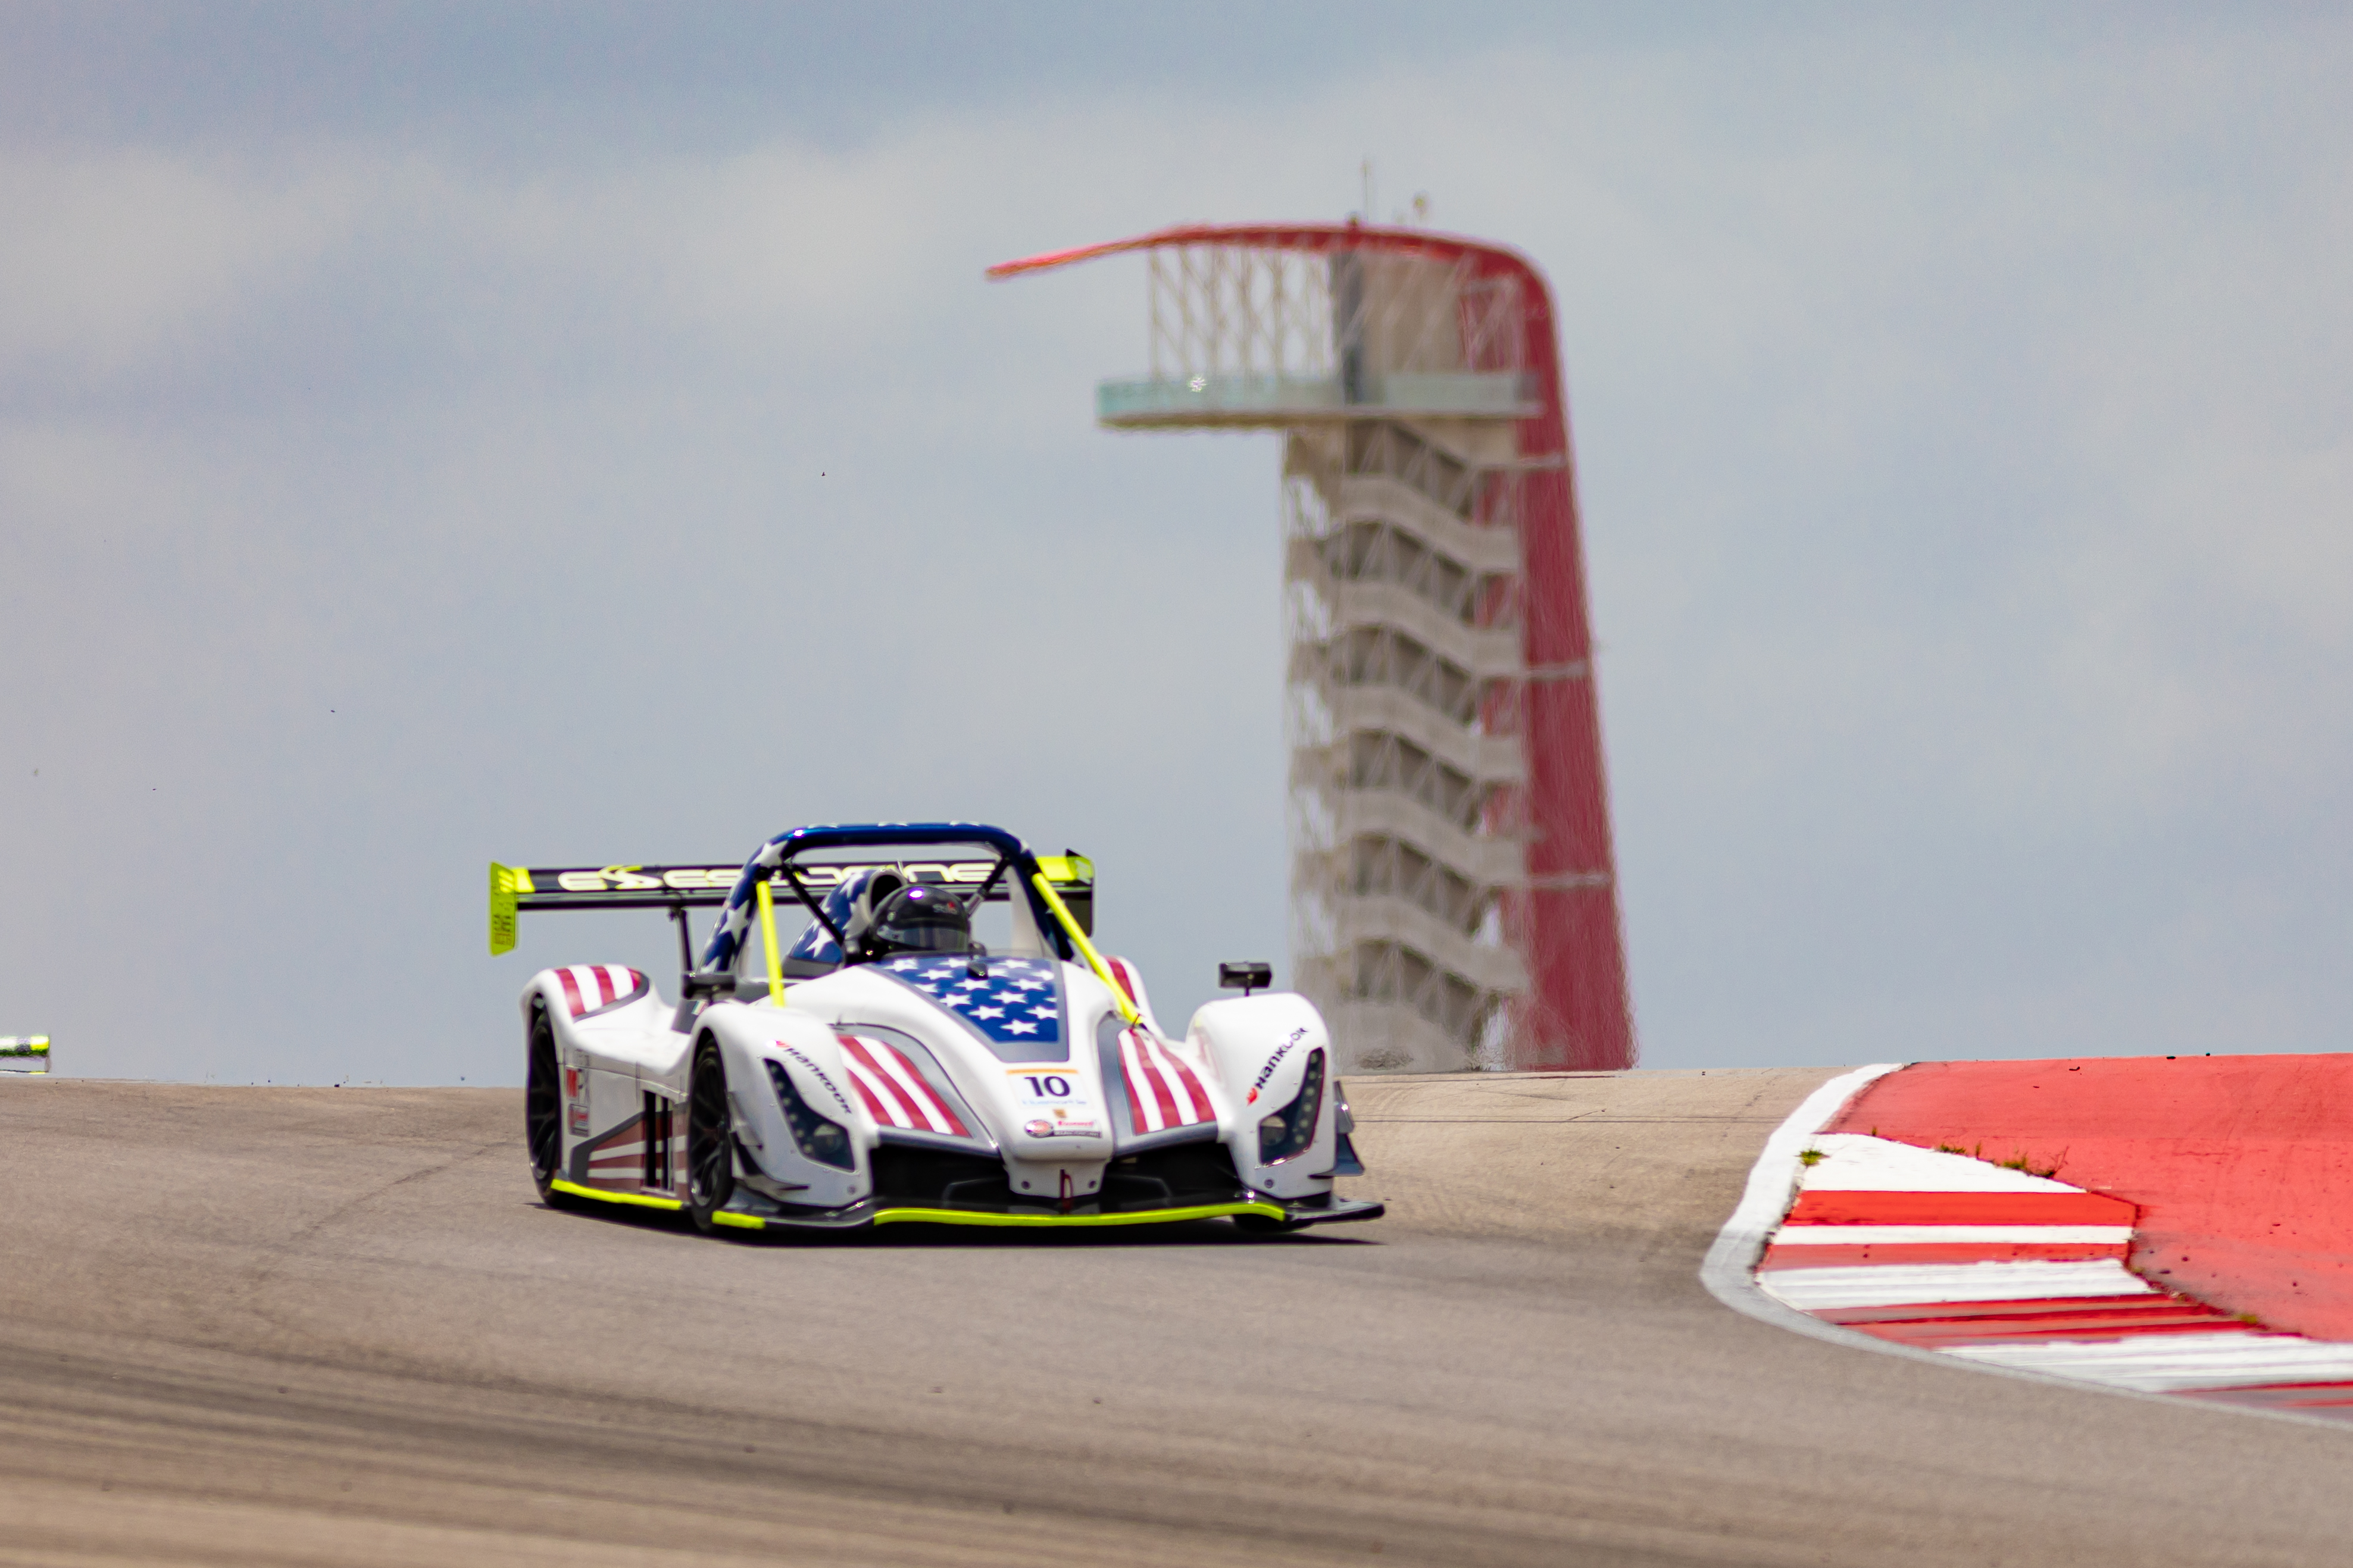 Over Thirty Cars for Penultimate Round of Radical Cup at COTA